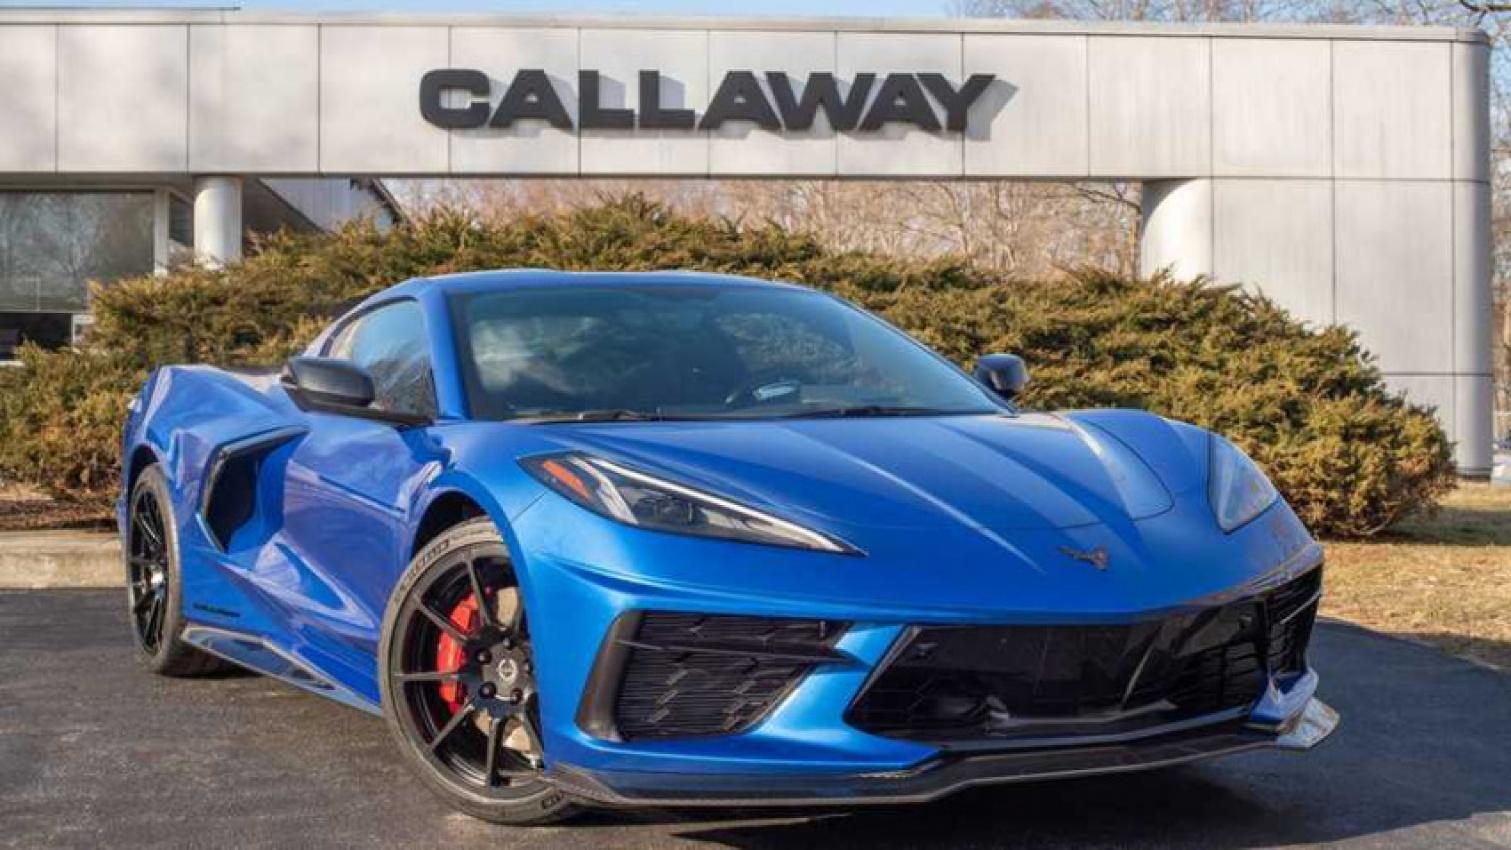 autos, cars, 2022 chevy corvette gets callaway treatment with 35th anniversary edition